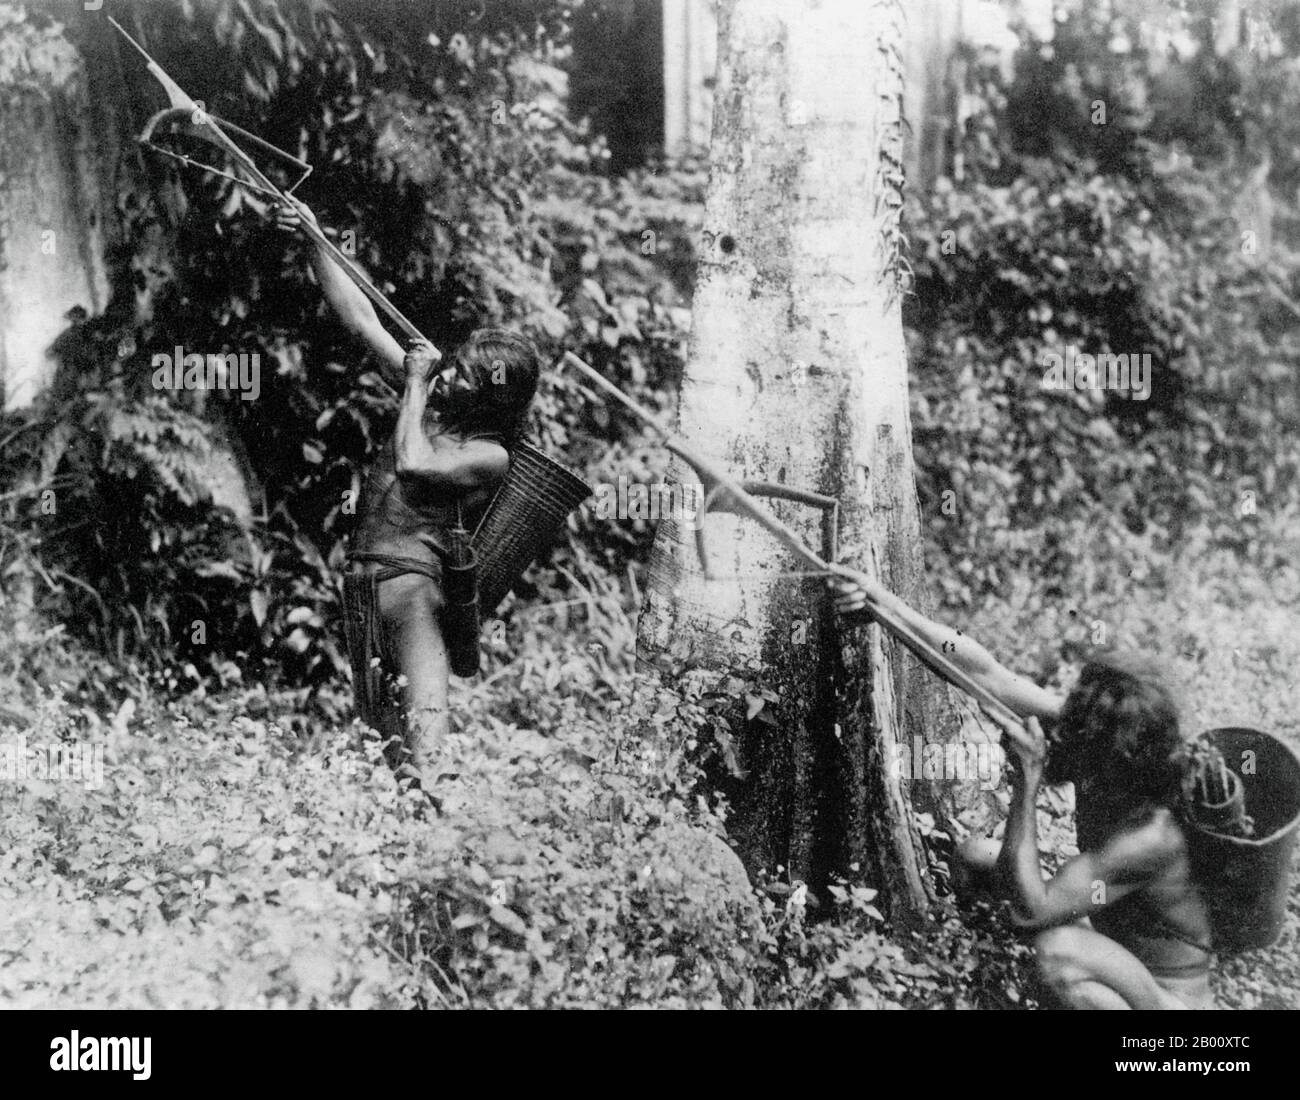 Cambodia/Laos/Vietnam: Men from the Stieng ethnic group hunt with spears in the jungle, 1920.  The Stieng people (Vietnamese: Xtieng) are an ethnic group of Vietnam and Cambodia that speak a Bahnaric language of Mon-Khmer roots. Most Stieng live in Binh Duong Province and Dong Nai Province in southeastern Vietnam. In Cambodia, they are grouped under the heading ‘Khmer Loeu’, referring to non-Khmer ethnic groups, or Degar peoples. Nowadays, many Stieng have converted to Christianity, though the total population of the group is estimated at just 6,000. Stock Photo